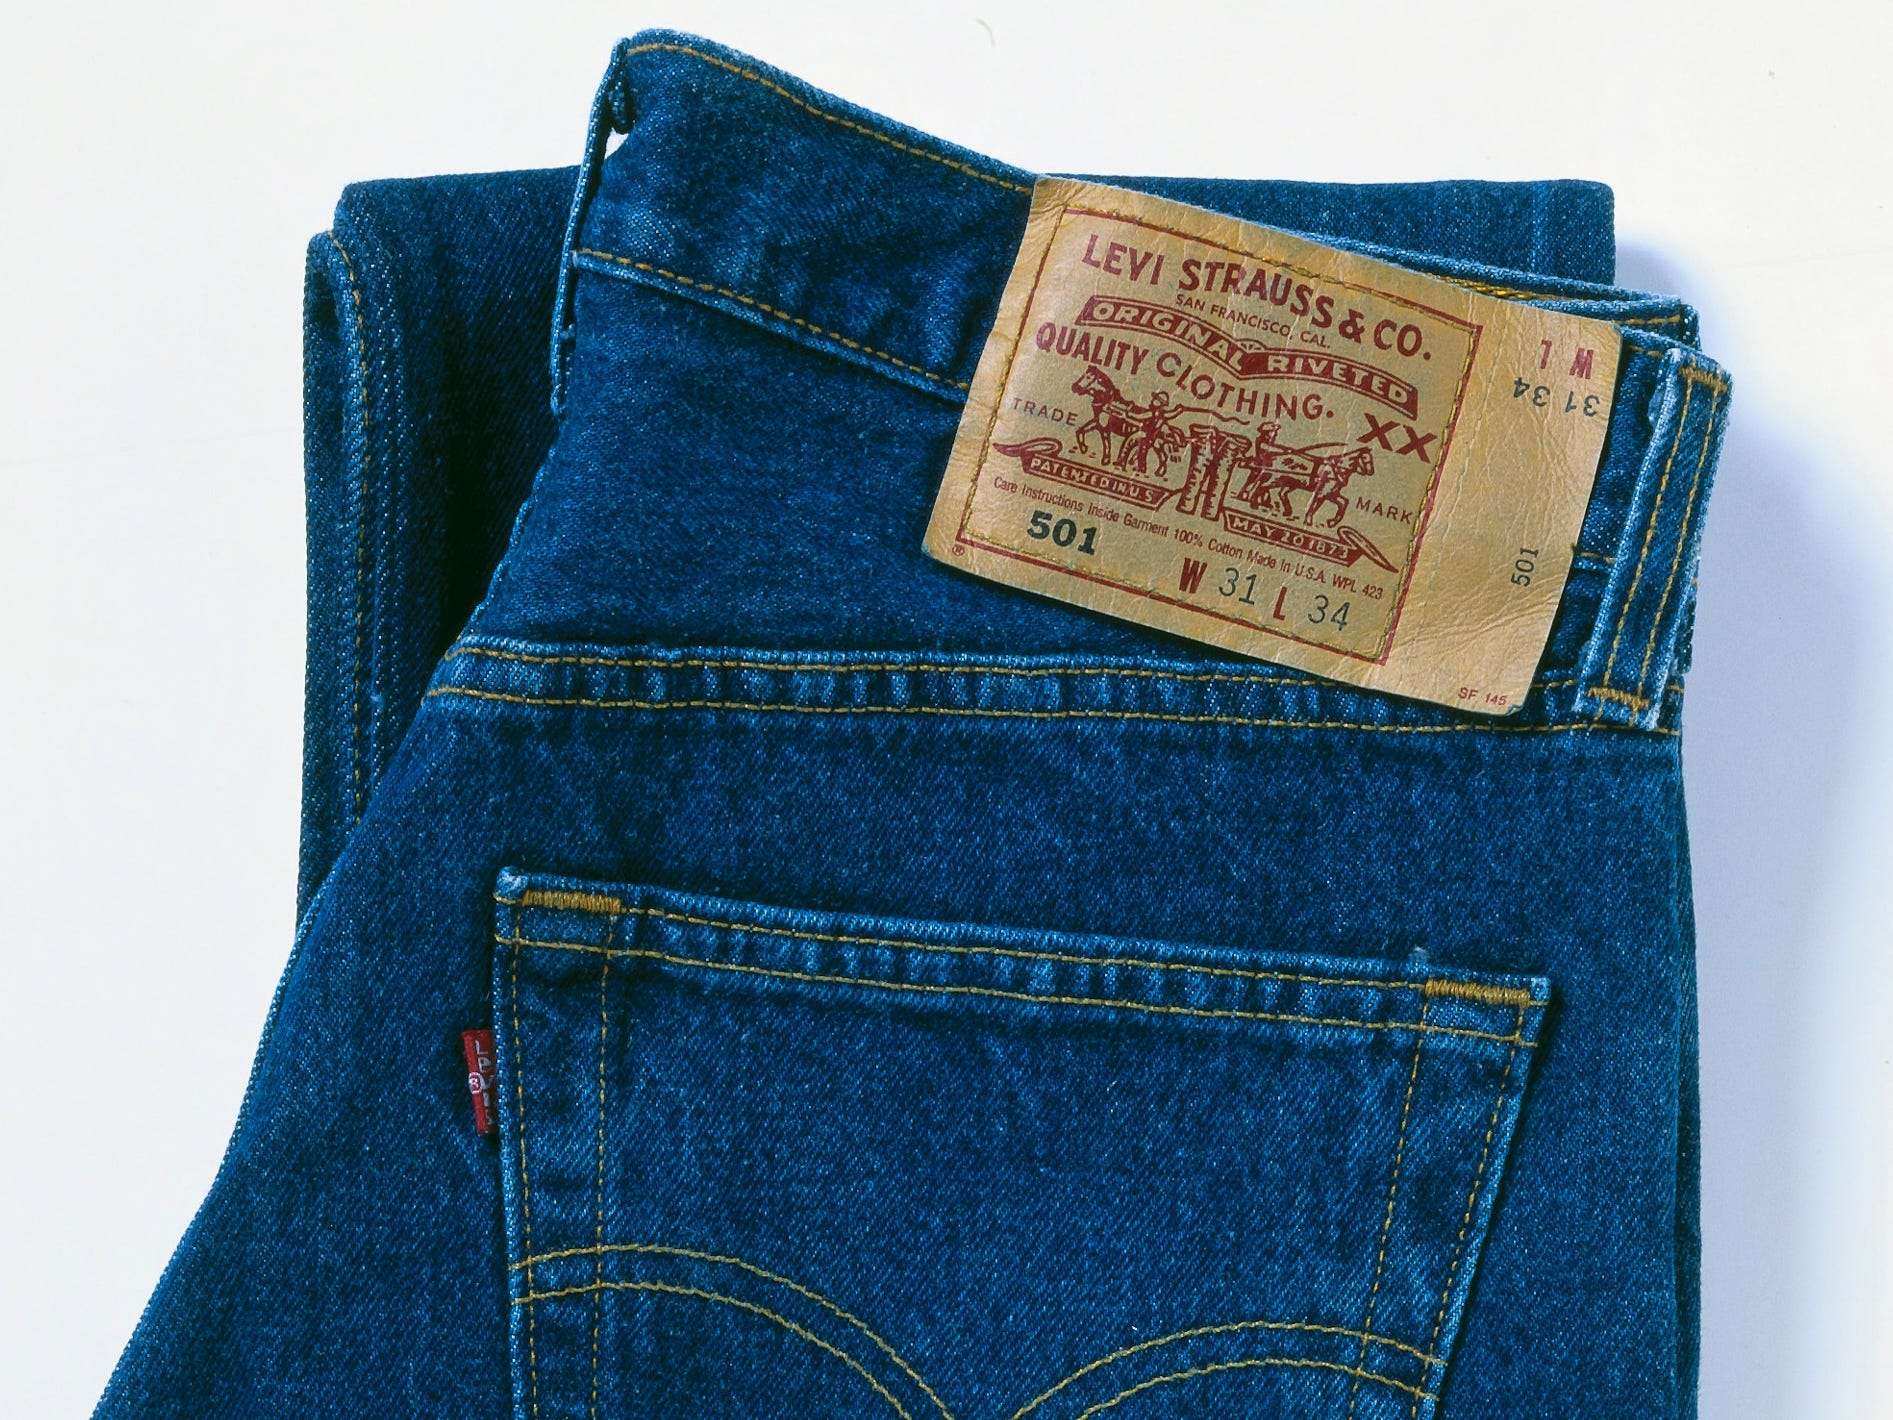 jeans were banned in East Germany